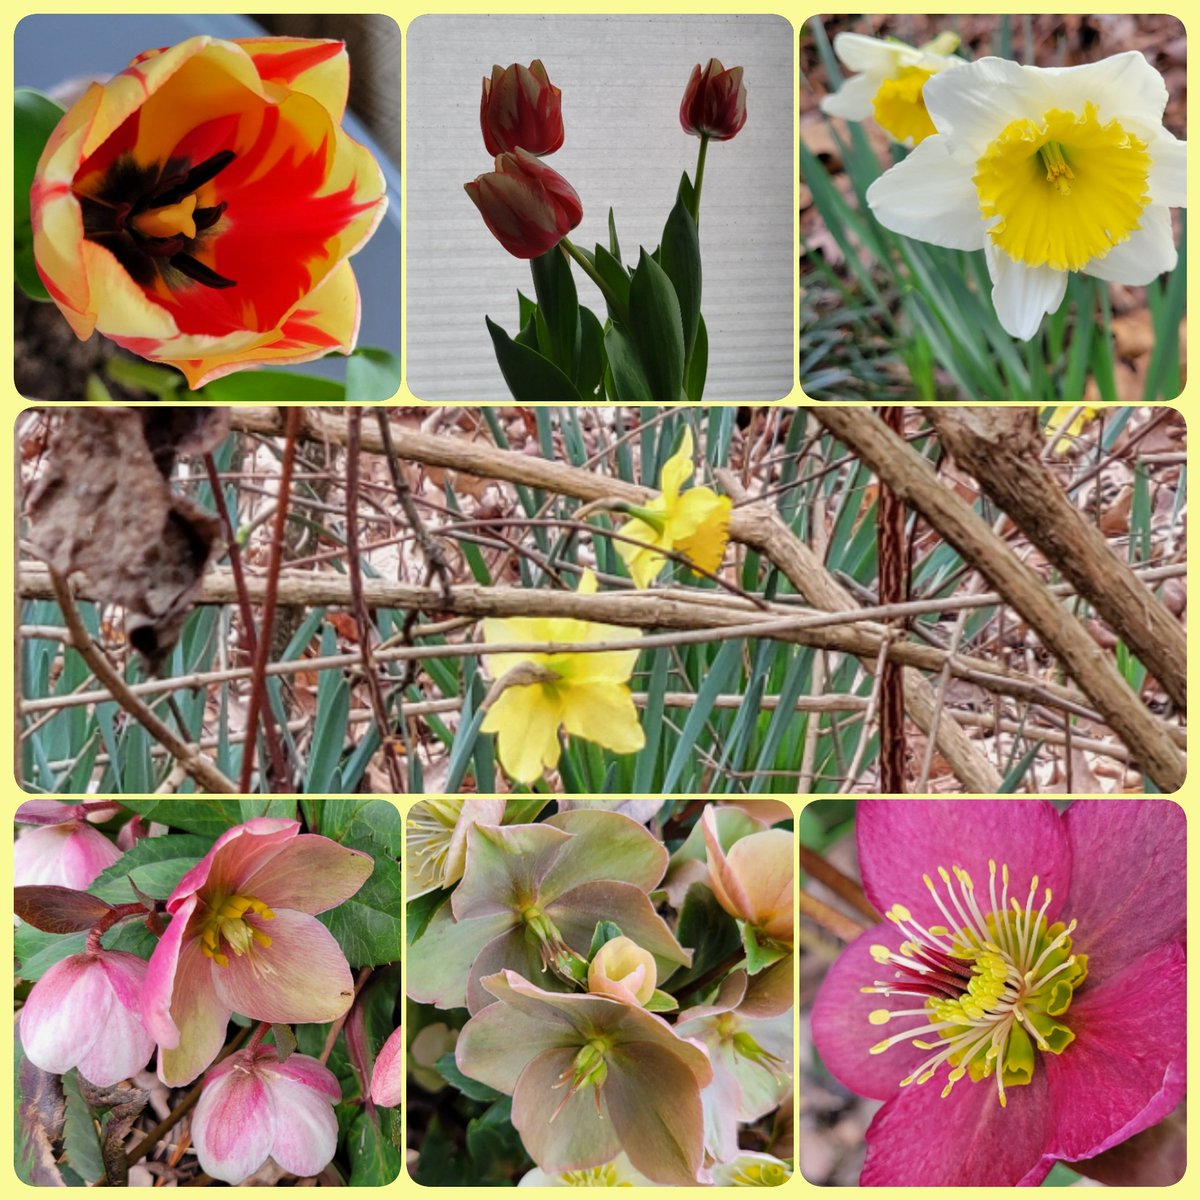 #SevenOnSunday from interior potted Tulips, Hellebores #InTheGarden exterior & Daffodils on the woods edge. #FebruaryFlowers